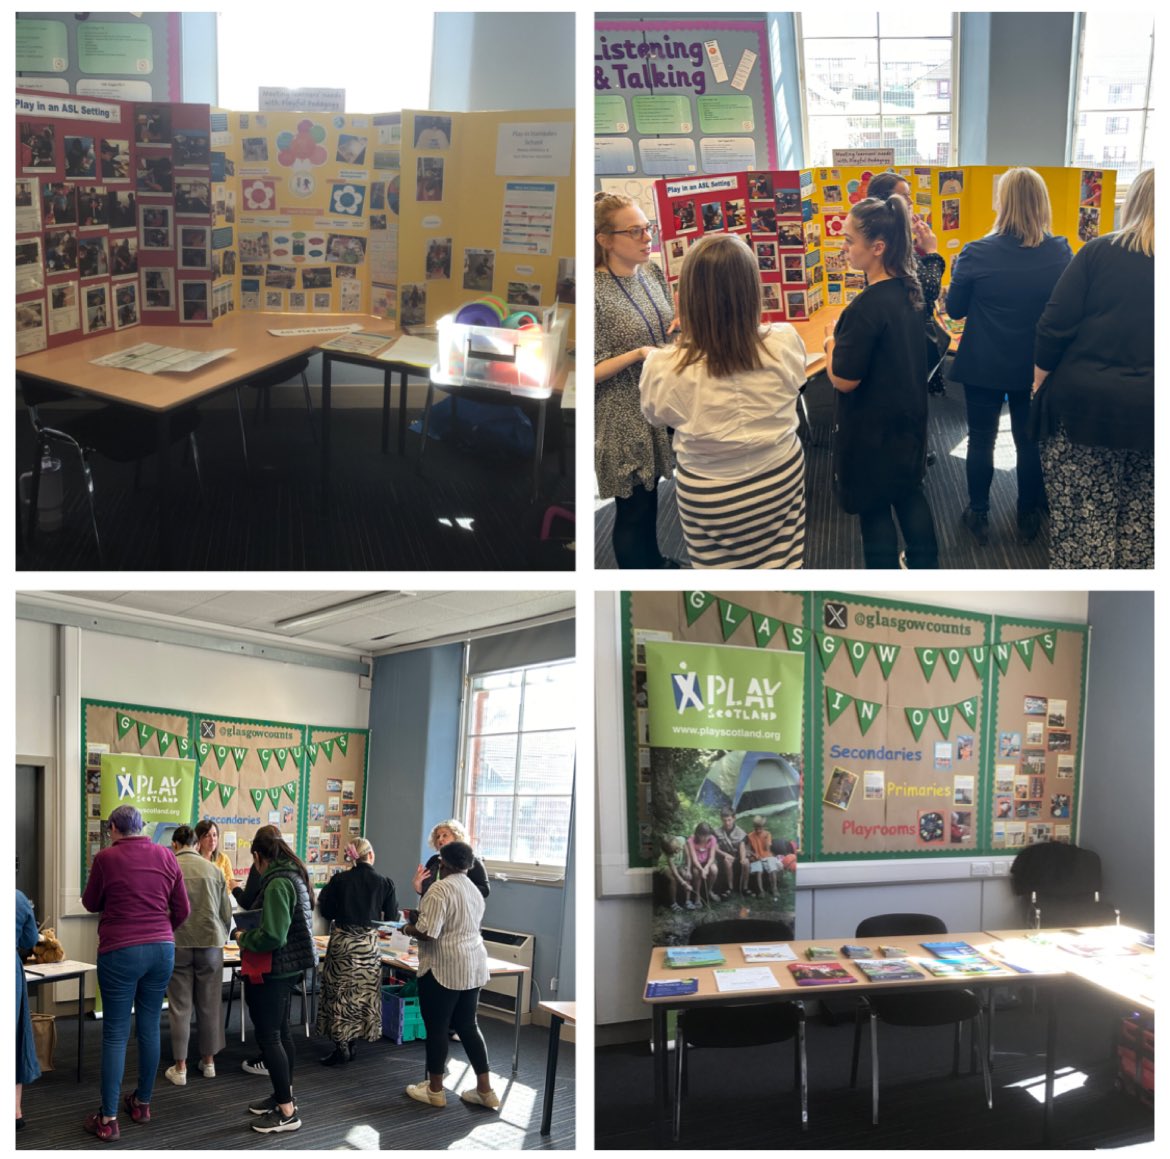 And we also want to say a big thank you to our partners for coming along and sharing practice today: @PlayScotland @ASLPlayGlasgow @GlasgowCREATE @glasgowcounts @GIC_Glasgow #playfulpedagogyGCC